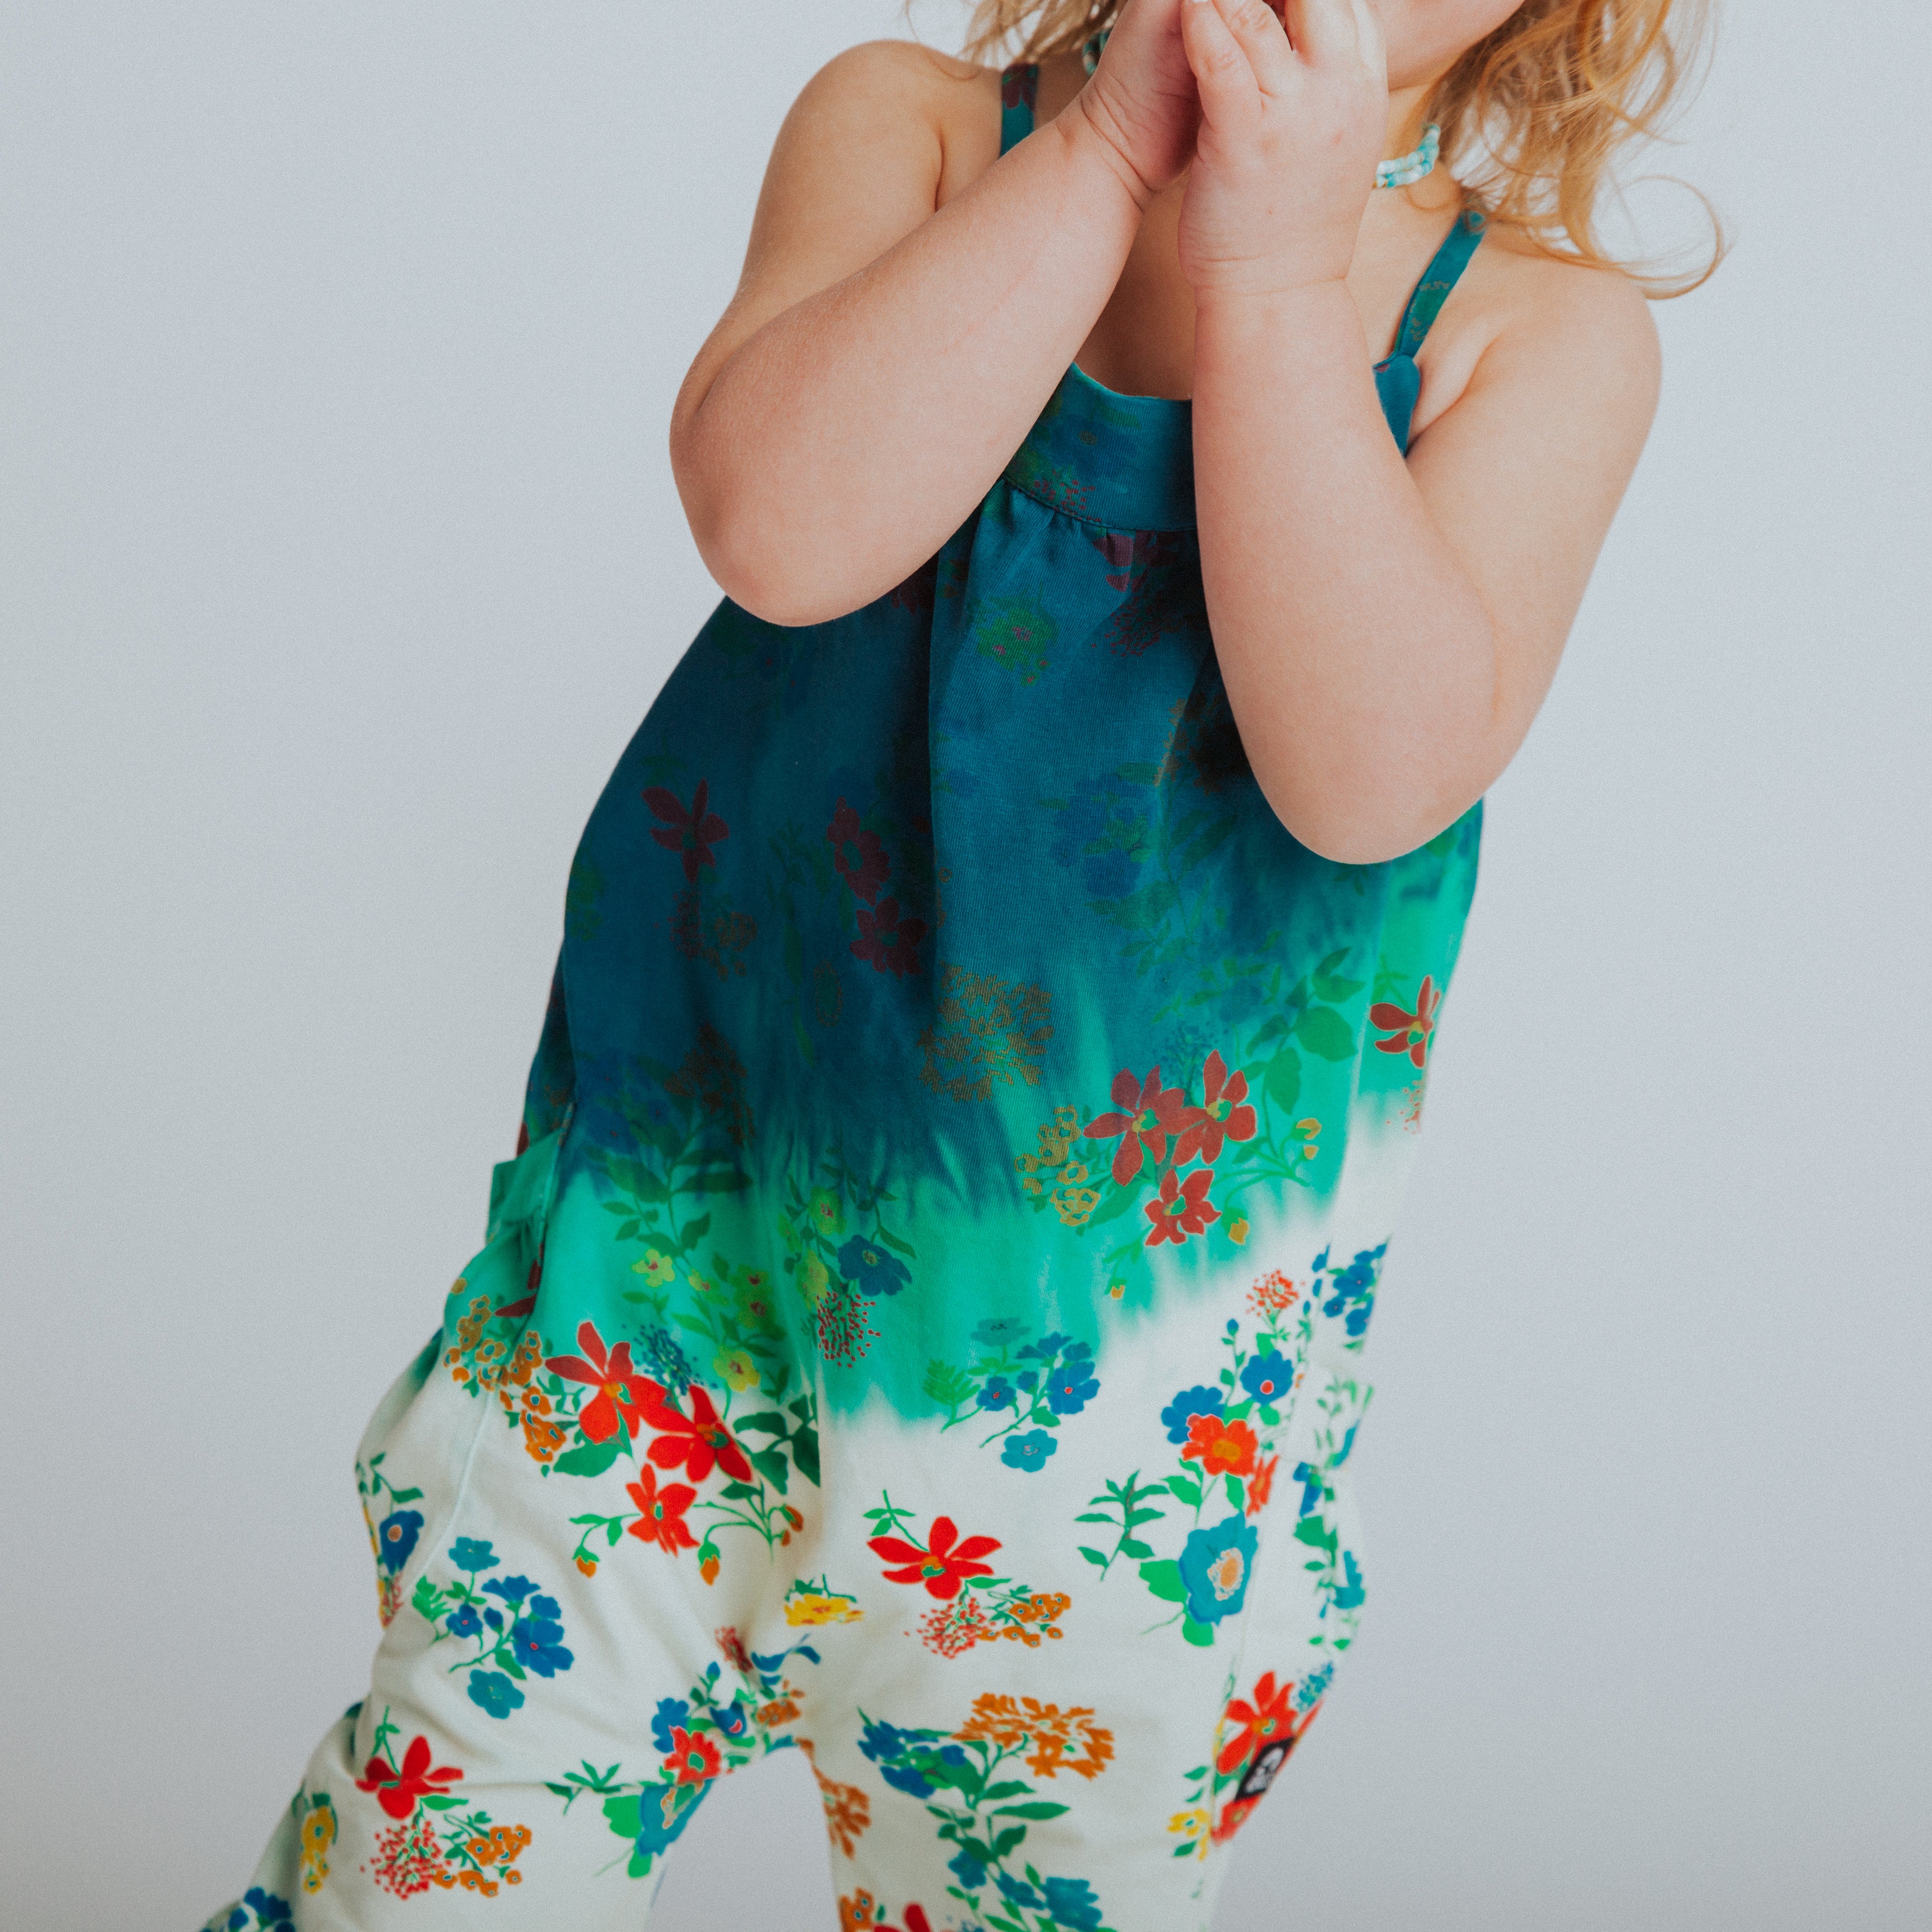 Gathered Strappy Tank Rag Romper With Side Pockets- Dip Dye Floral